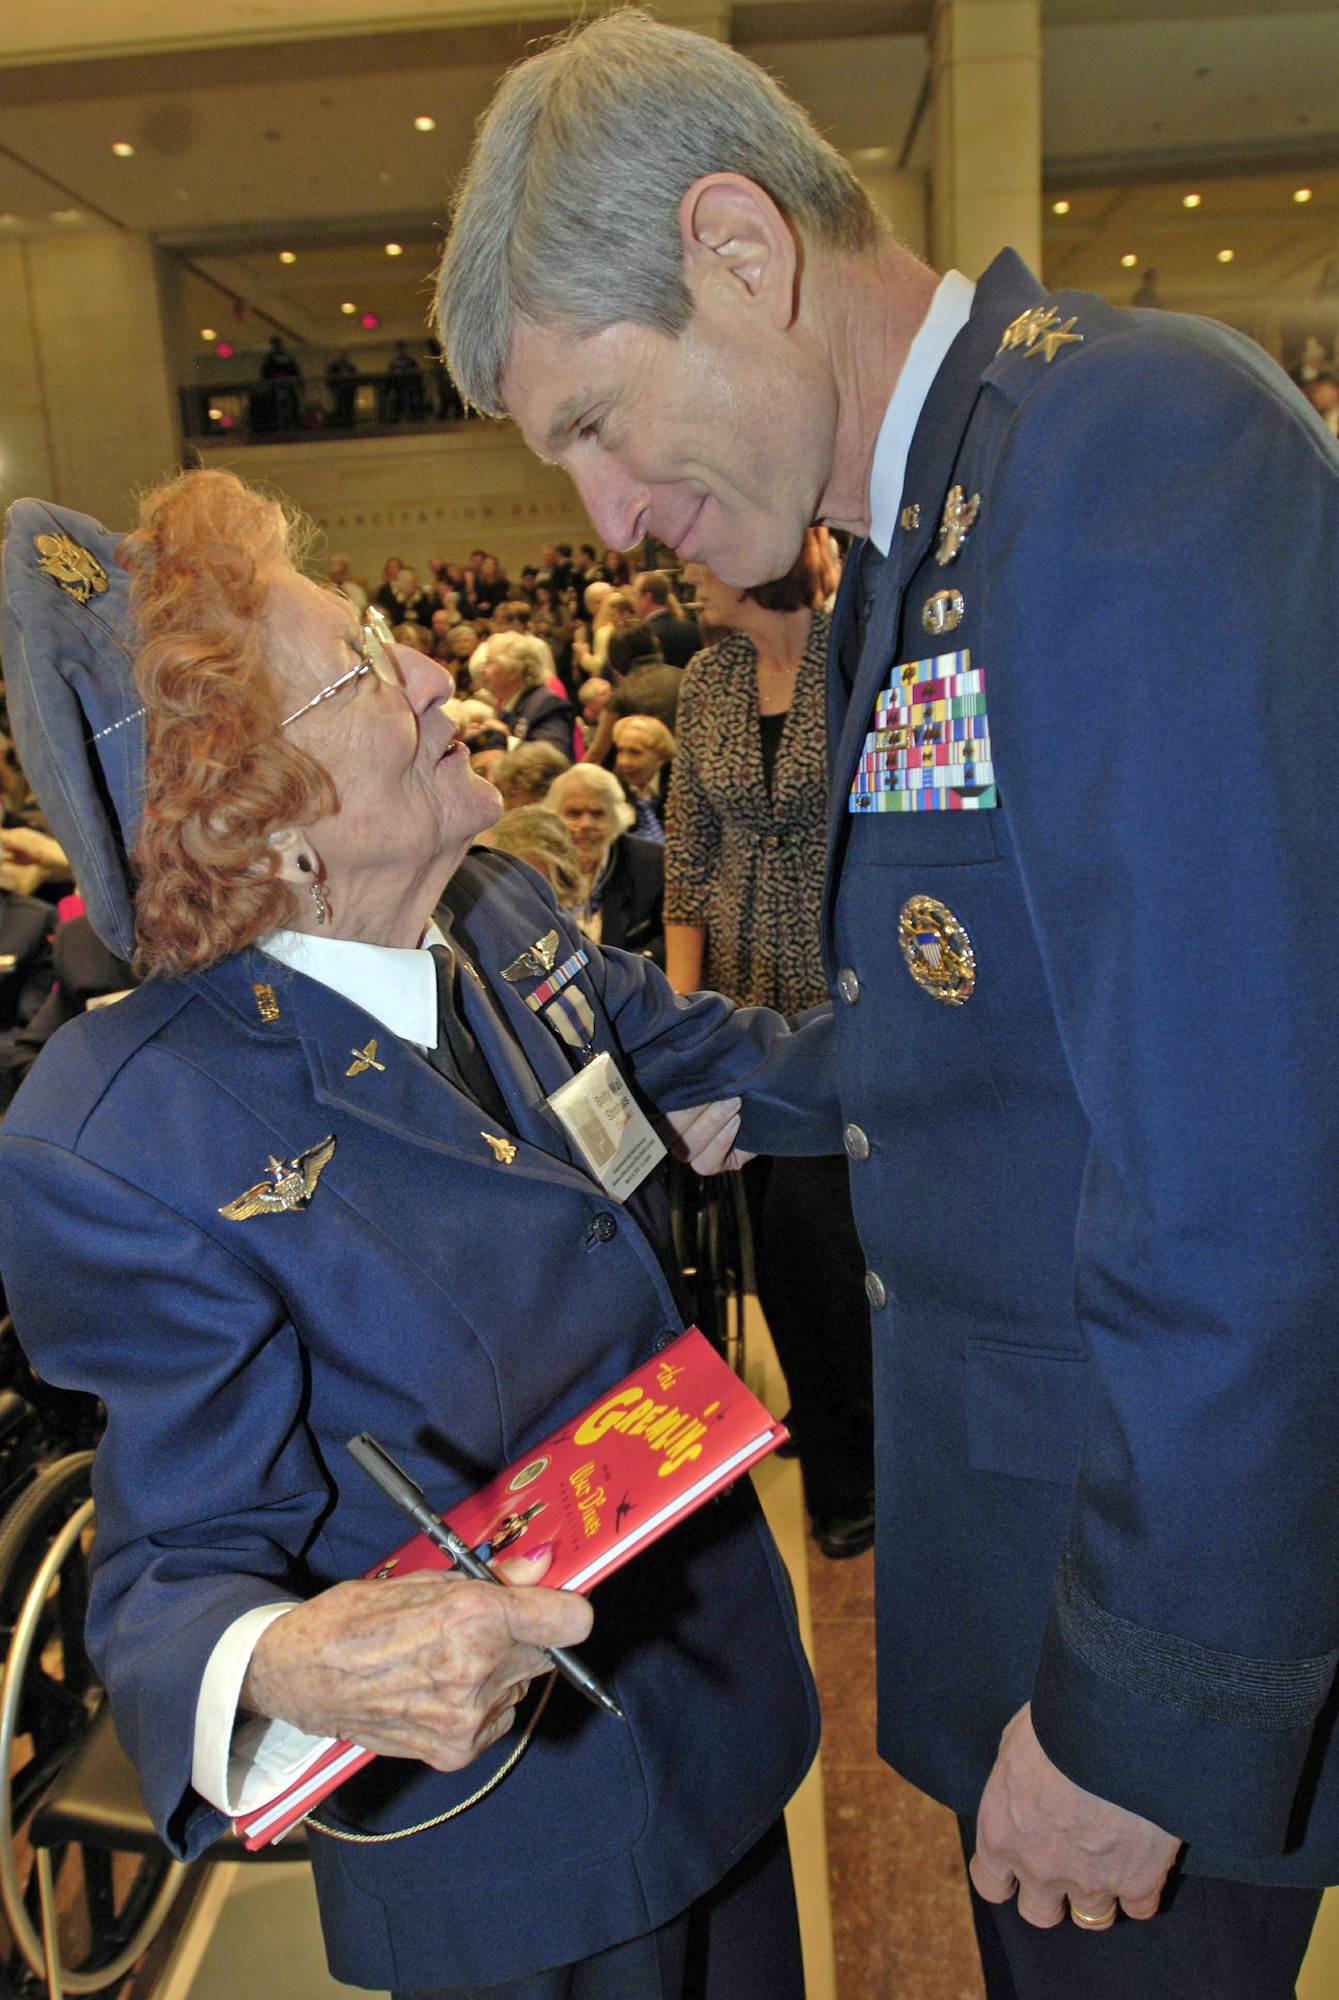 Betty Wall Strohfus, a Women Airforce Service Pilot from Minnesota, talks with Air Force Chief of Staff Gen. Norton Schwartz at the Congressional Gold Medal ceremony at the Capitol March 10, 2010. More than 200 WASPs attended the event, many of them wearing their World War II-era uniforms. The audience, which Speaker Nancy Pelosi noted was one of the largest ever in the Capitol and too large to fit into Emancipation Hall, also included their families, as well as the families of those who have since died or couldn't travel. (U.S. Air Force photo/Staff Sgt. J.G. Buzanowski)
